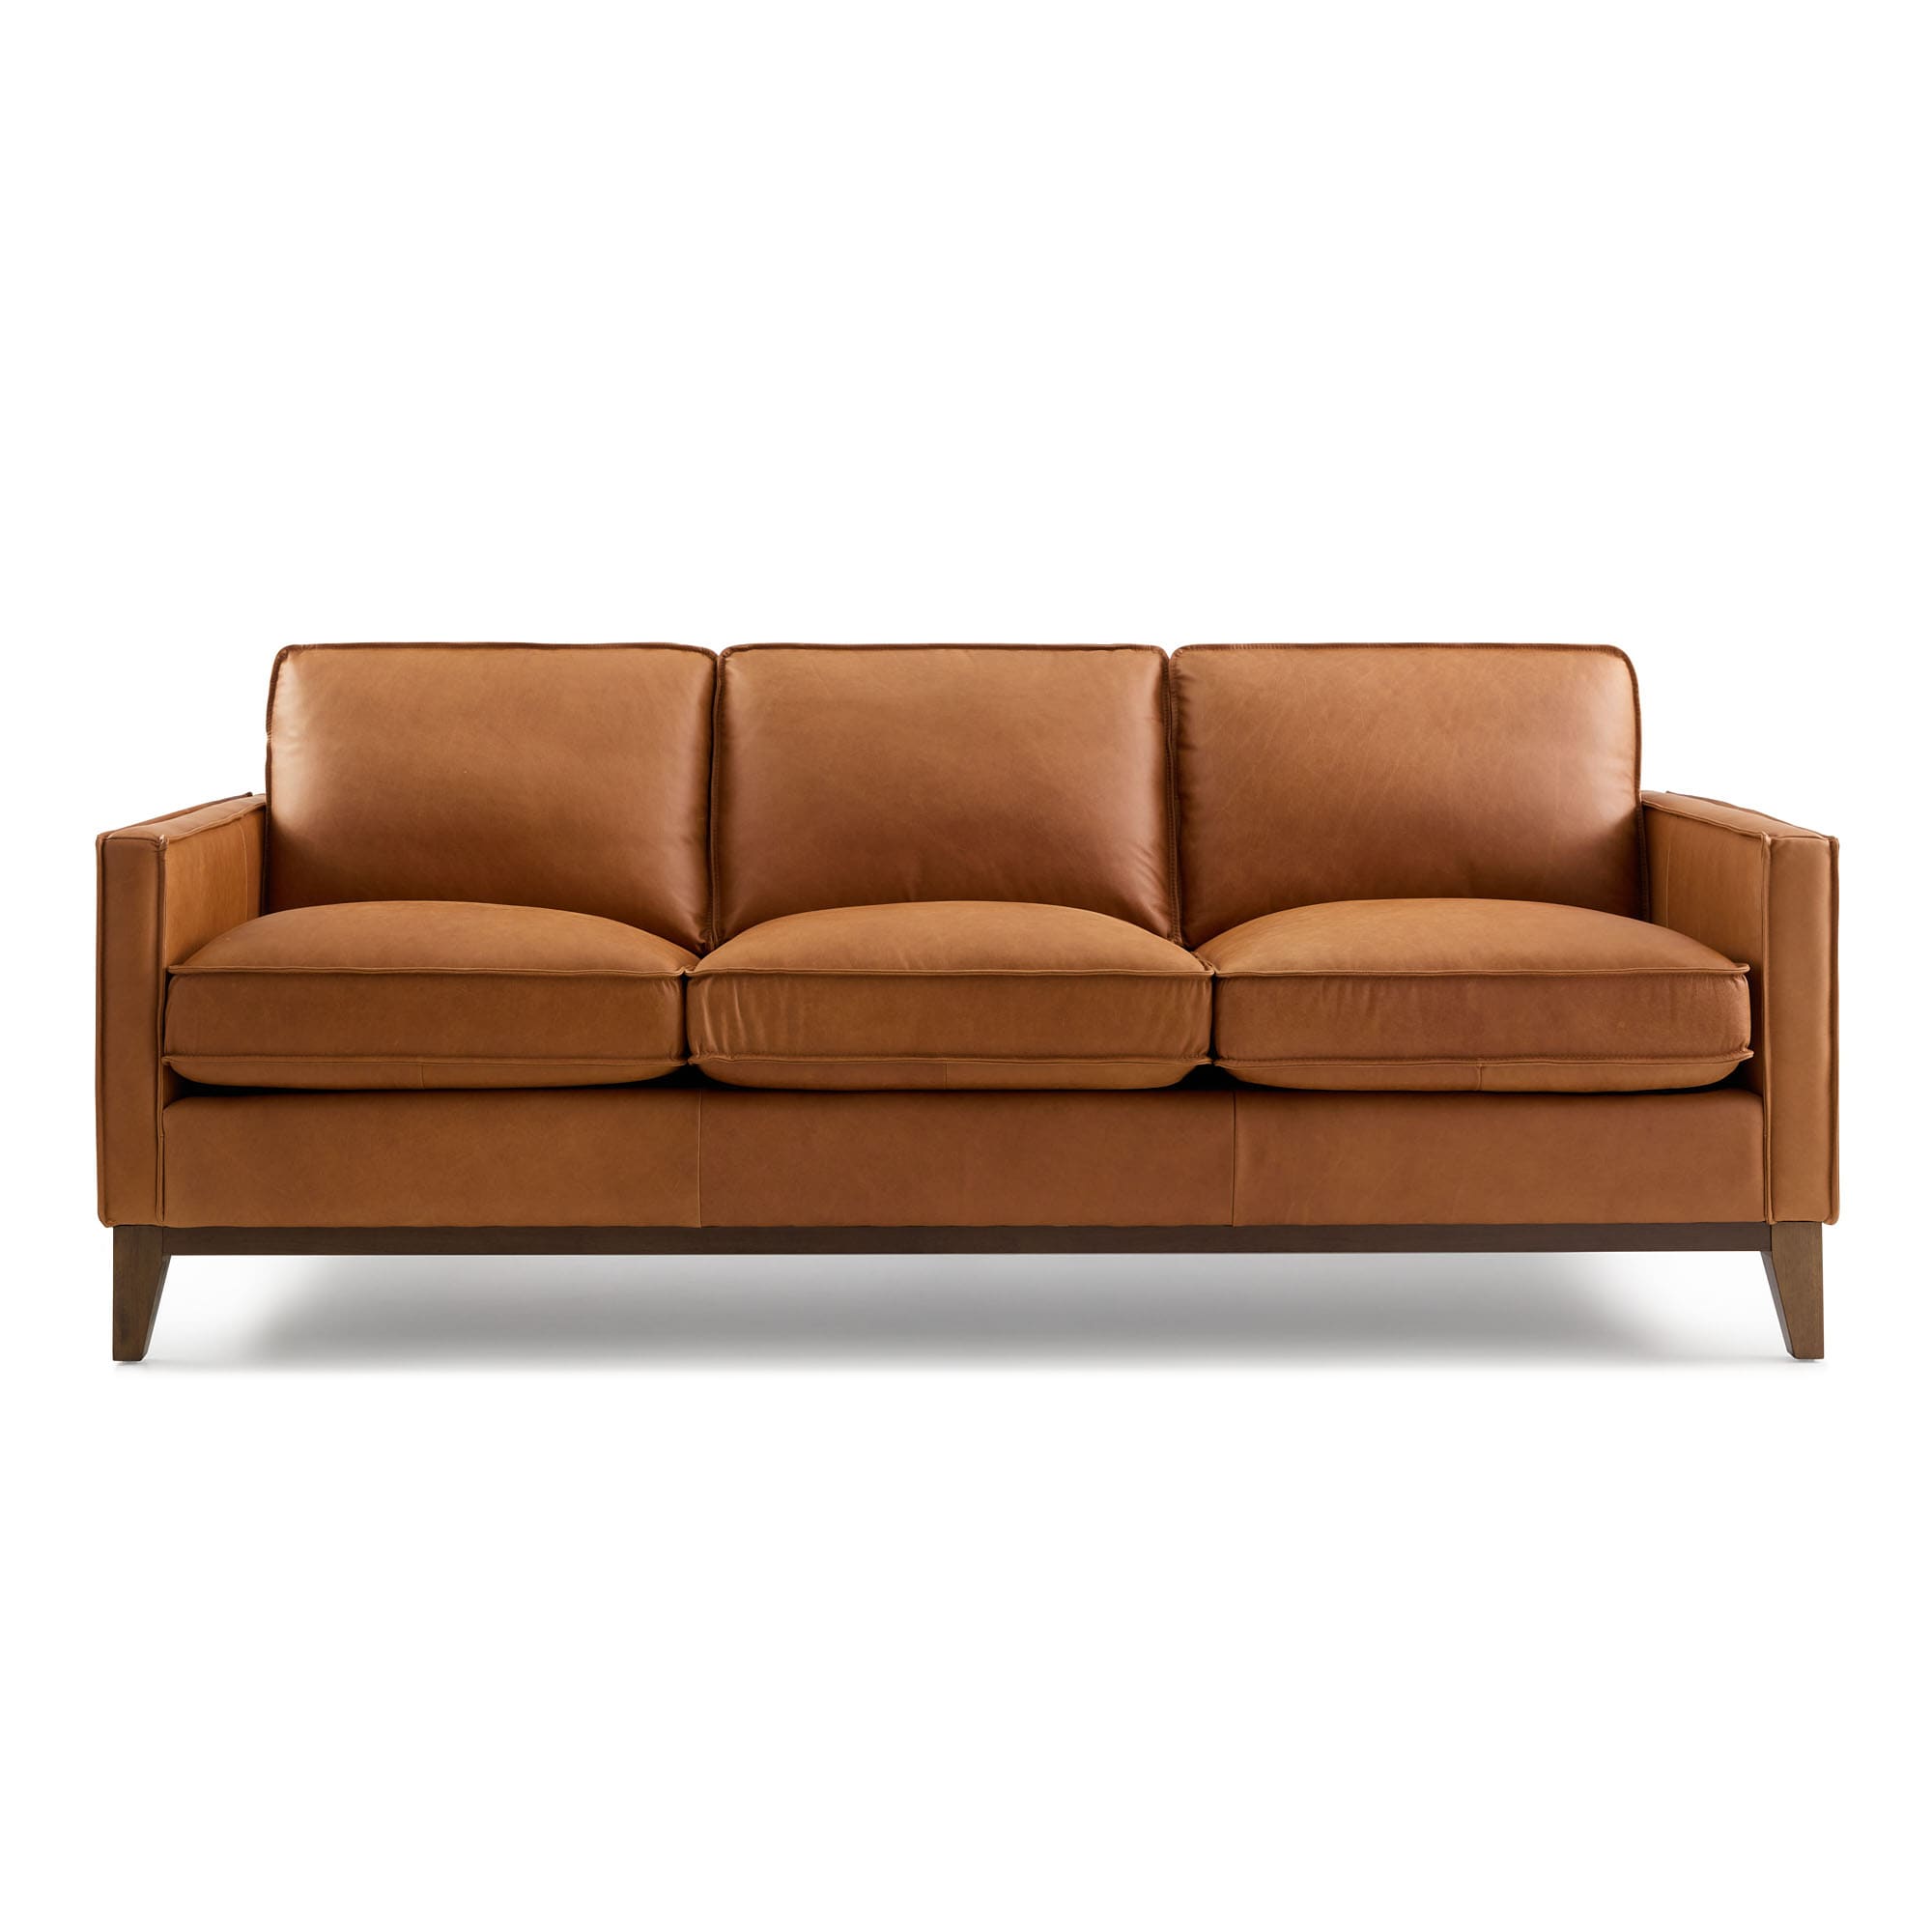 New Heights 34 5 In Modern Chestnut Brown Genuine Leather Sofa The Couches Sofas Loveseats Department At Lowes Com